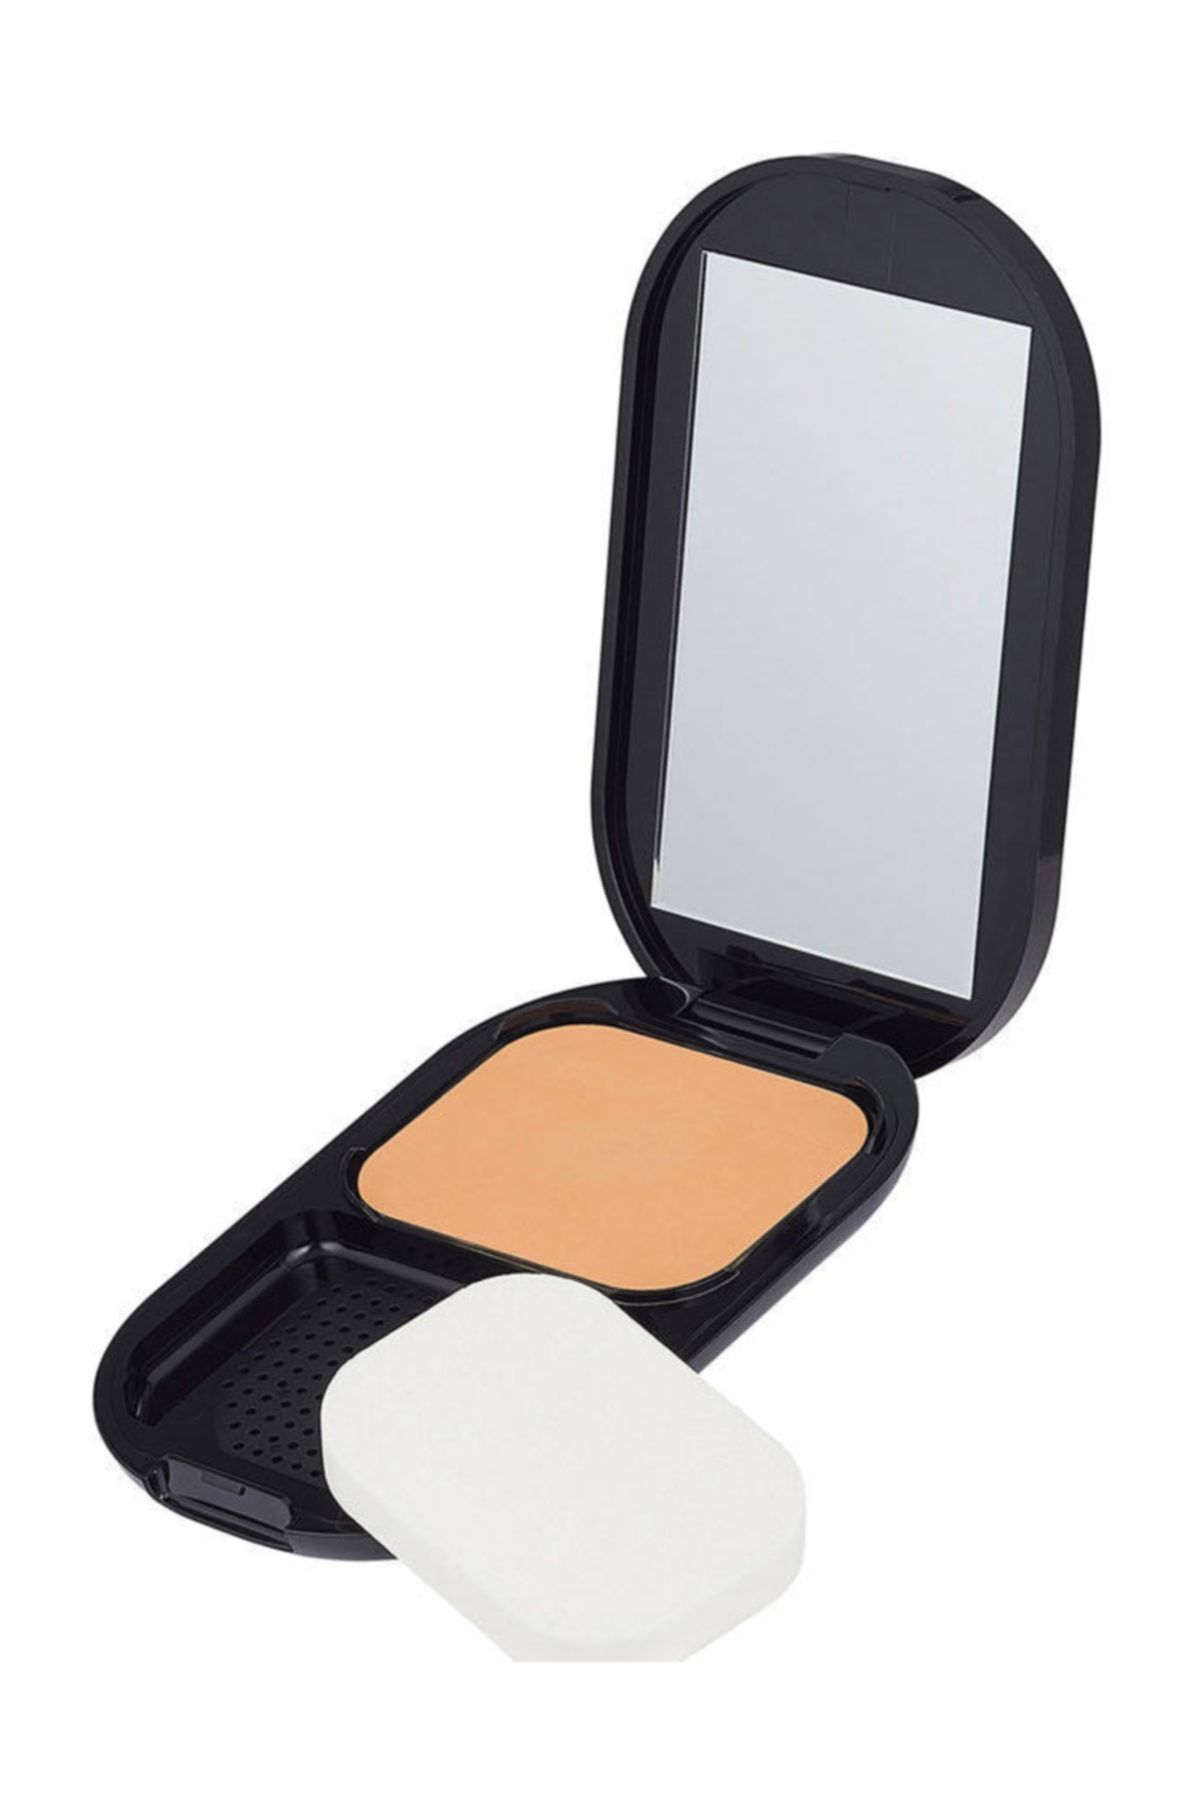 Max Factor Pudra - Facefinity Compact Powder 006 Golden 8005610545073